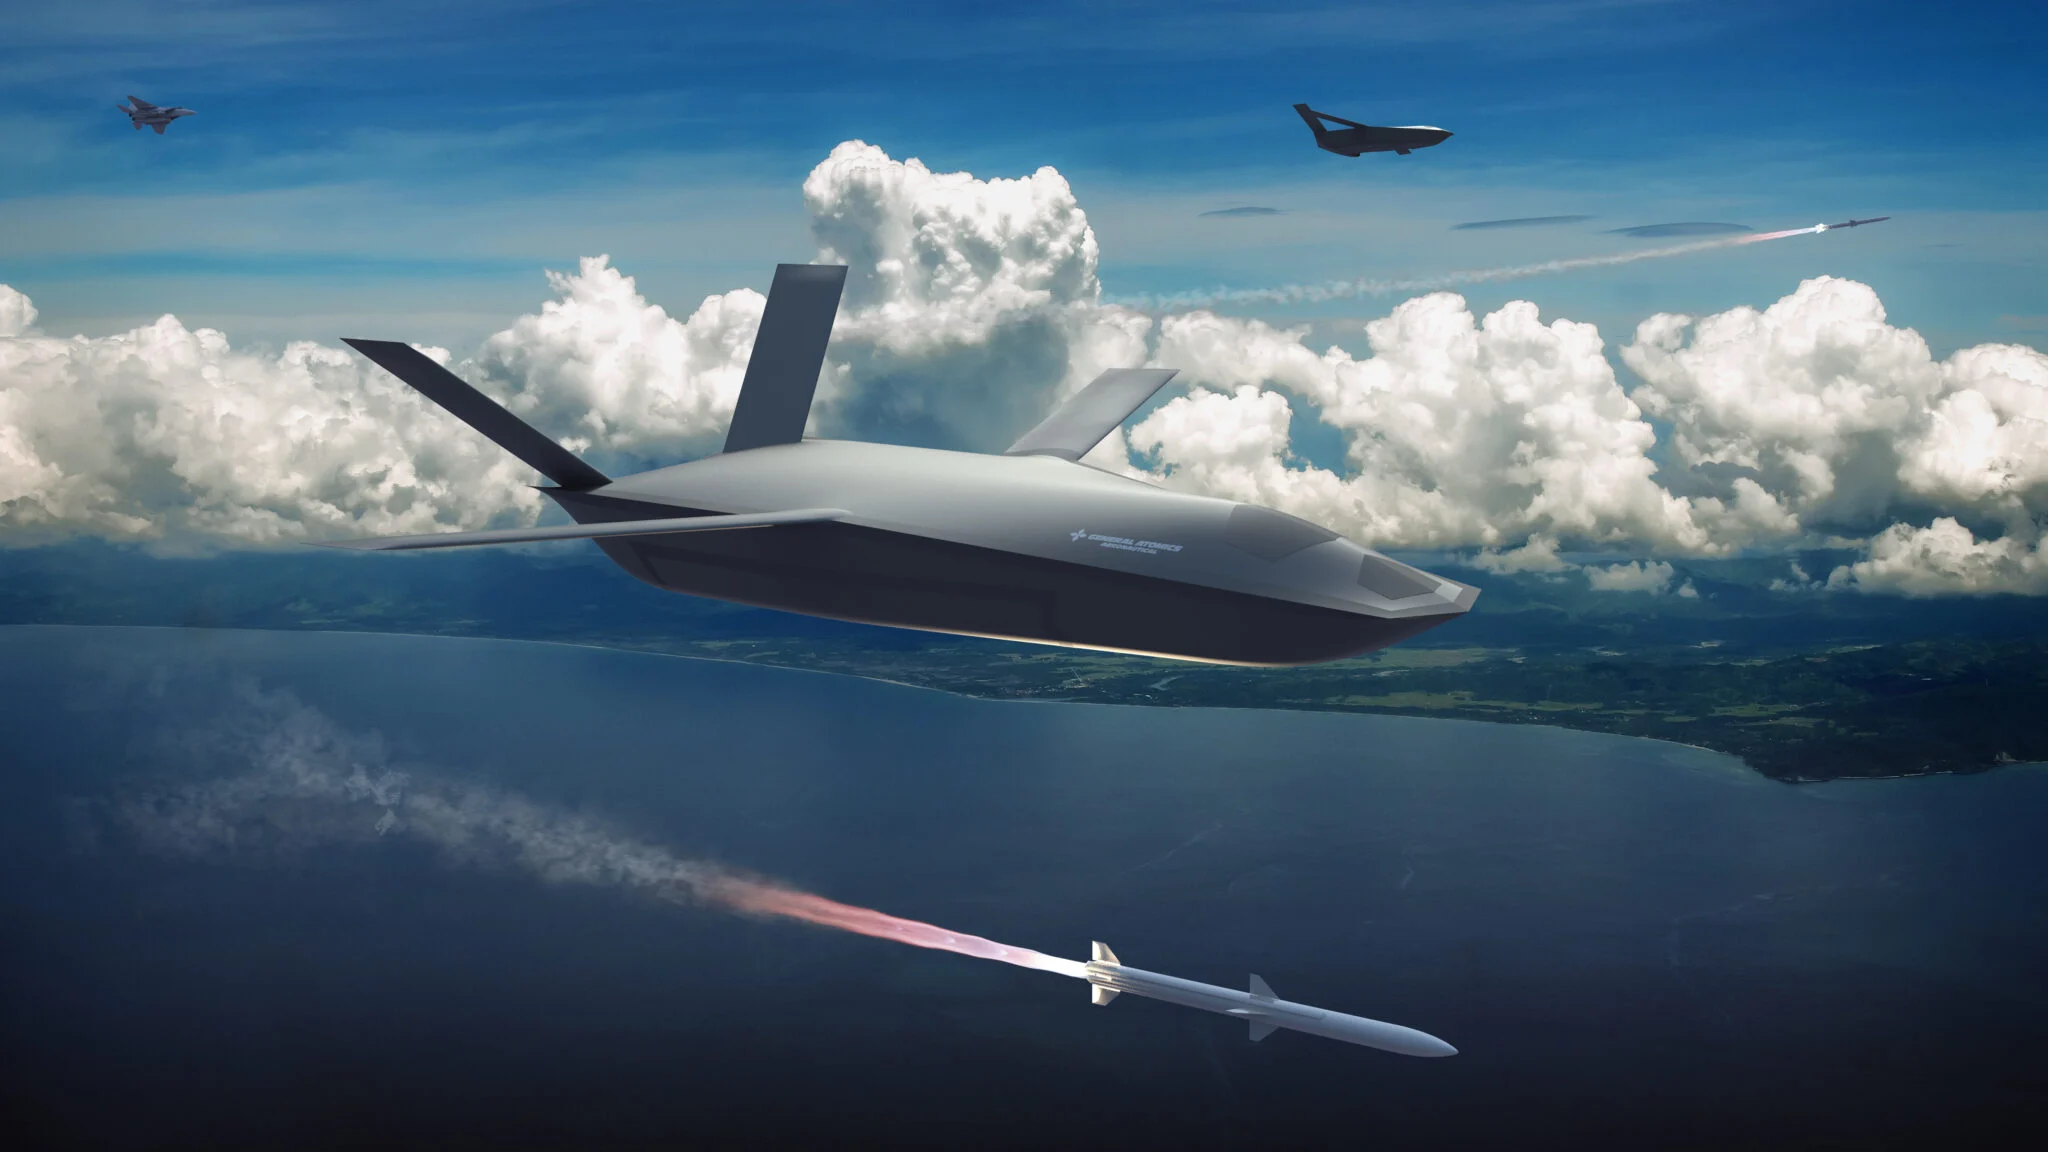 General Atomics develops LongShot drones with missiles for launch from large aircraft